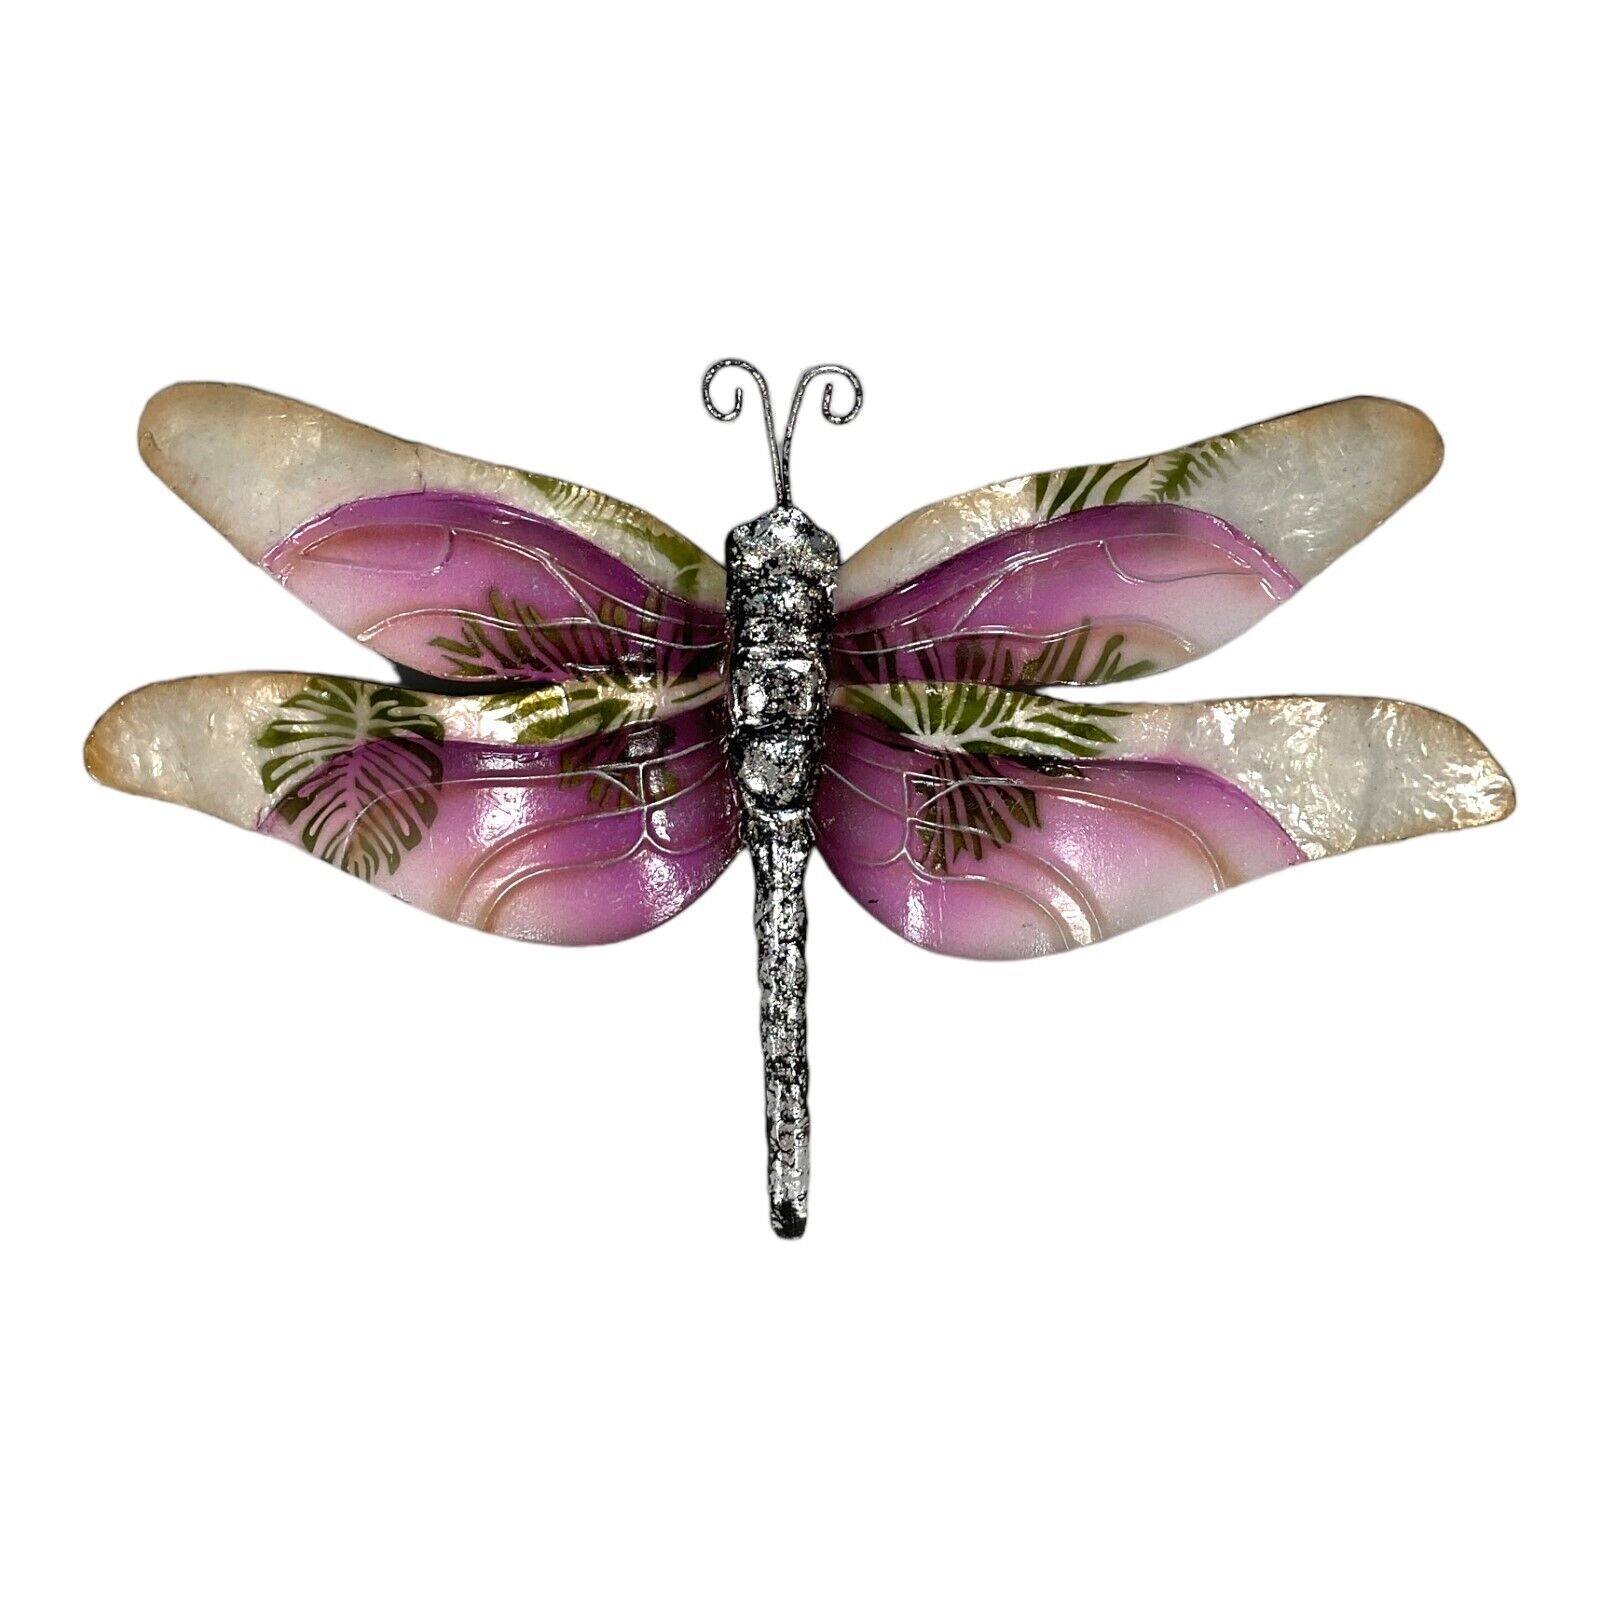 Bamboo Source Garden Collection Multicolor Metal Dragonfly Wall Decor 13 inch